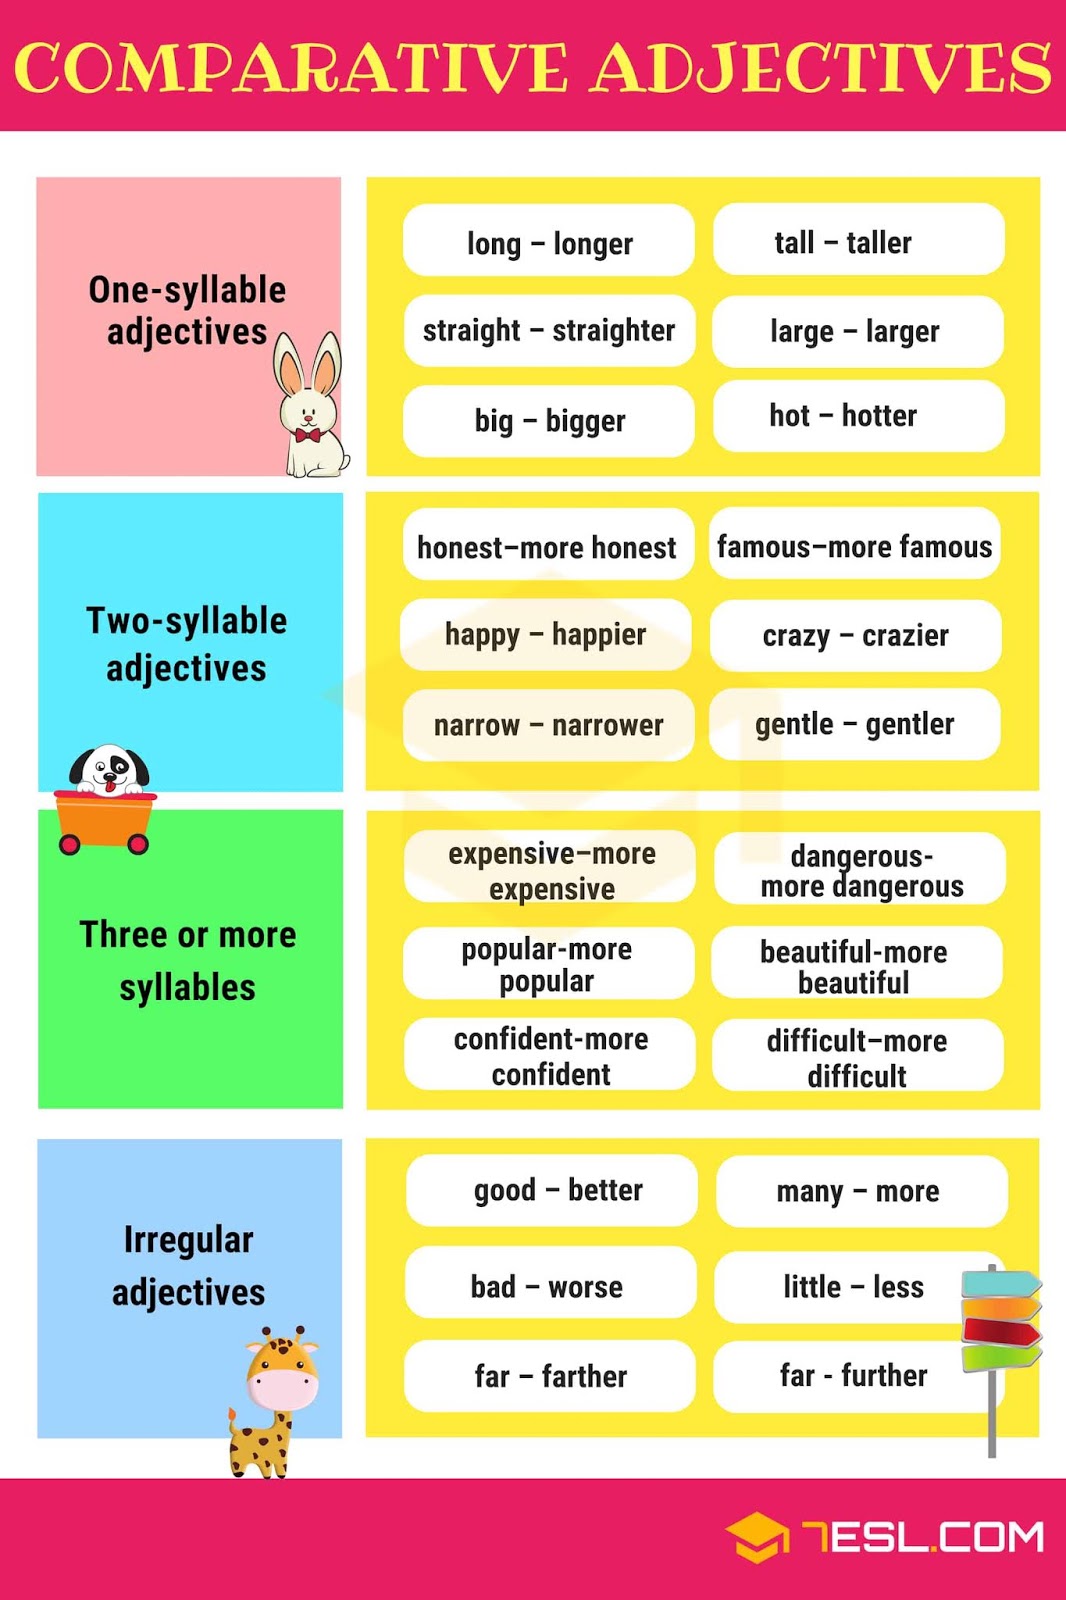 english-is-funtastic-comparative-adjectives-infographic